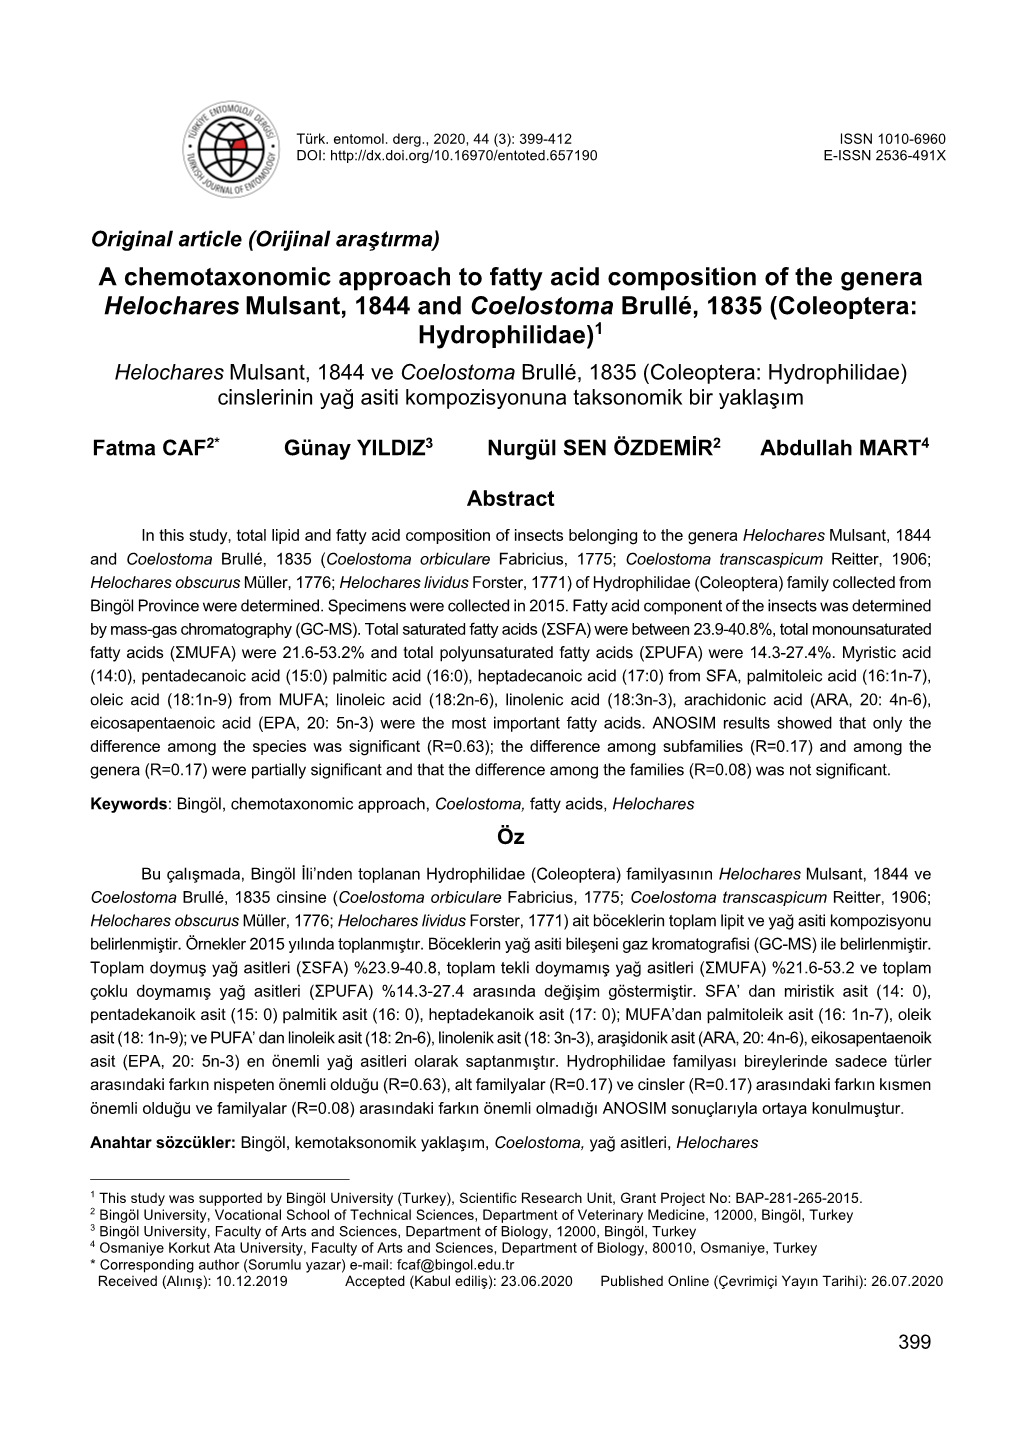 A Chemotaxonomic Approach to Fatty Acid Composition of The